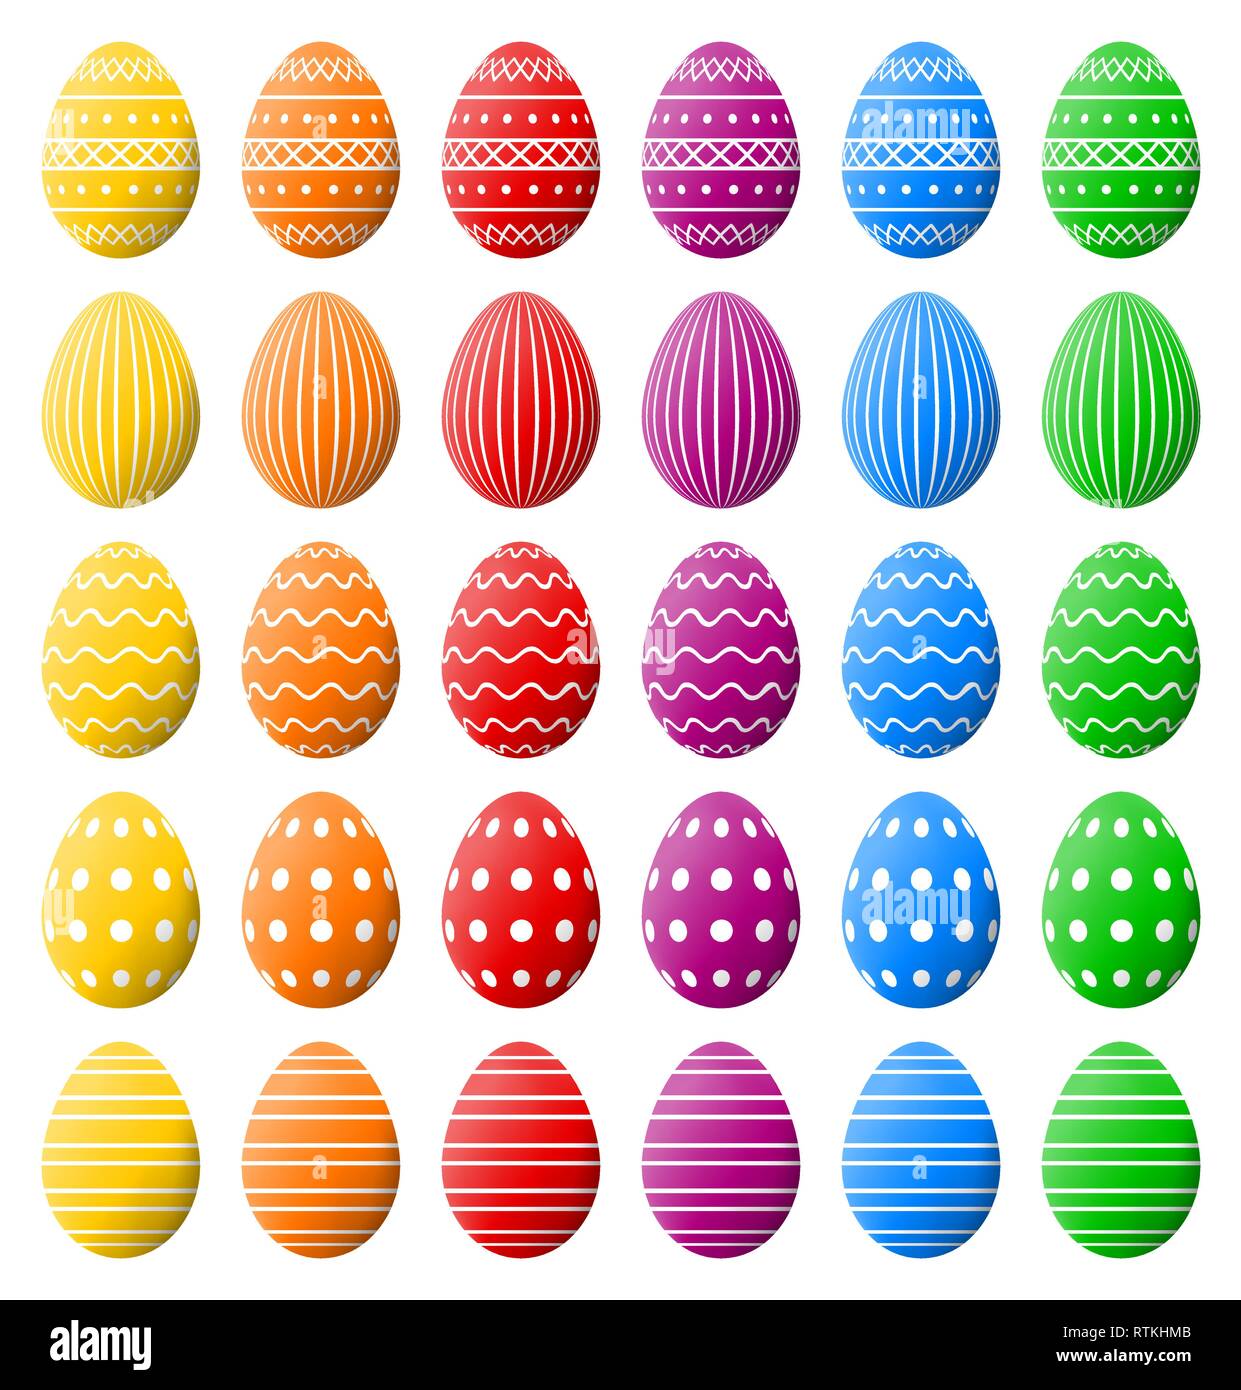 Colorful spectrum of Easter eggs for Easter holidays. High quality vector eggs isolated on white background. Stock Vector